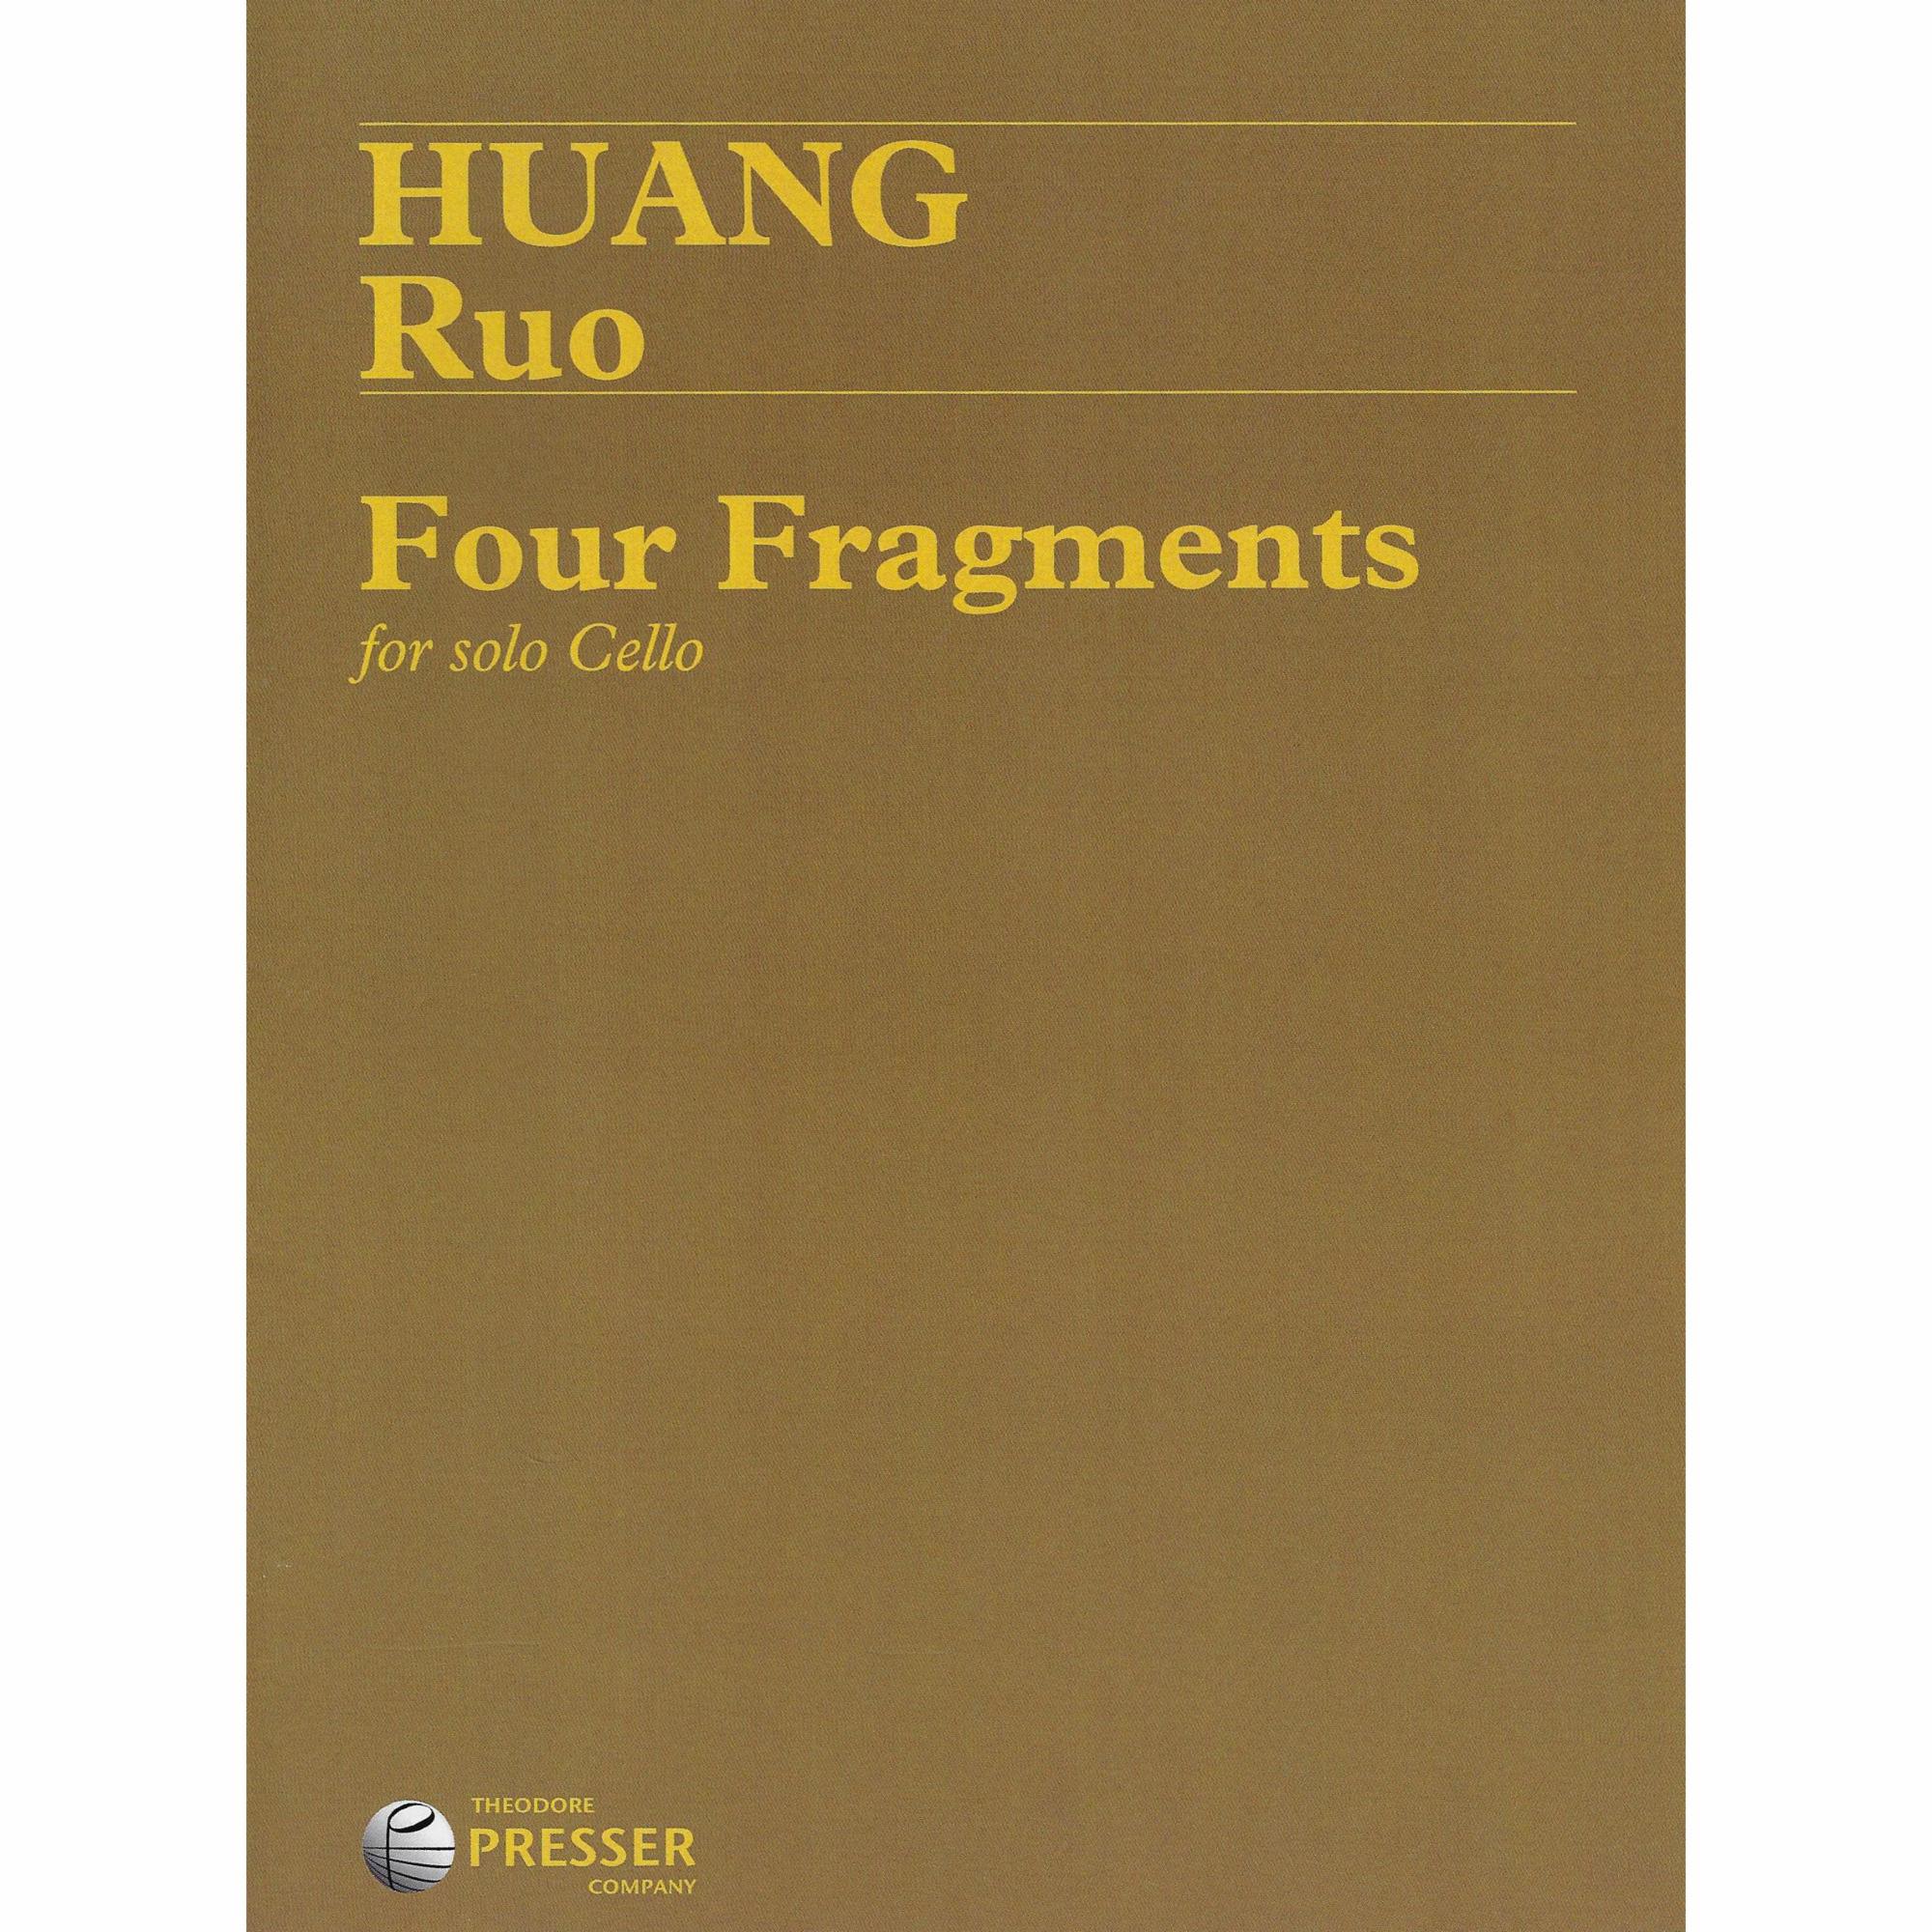 Huang -- Four Fragments for Solo Cello